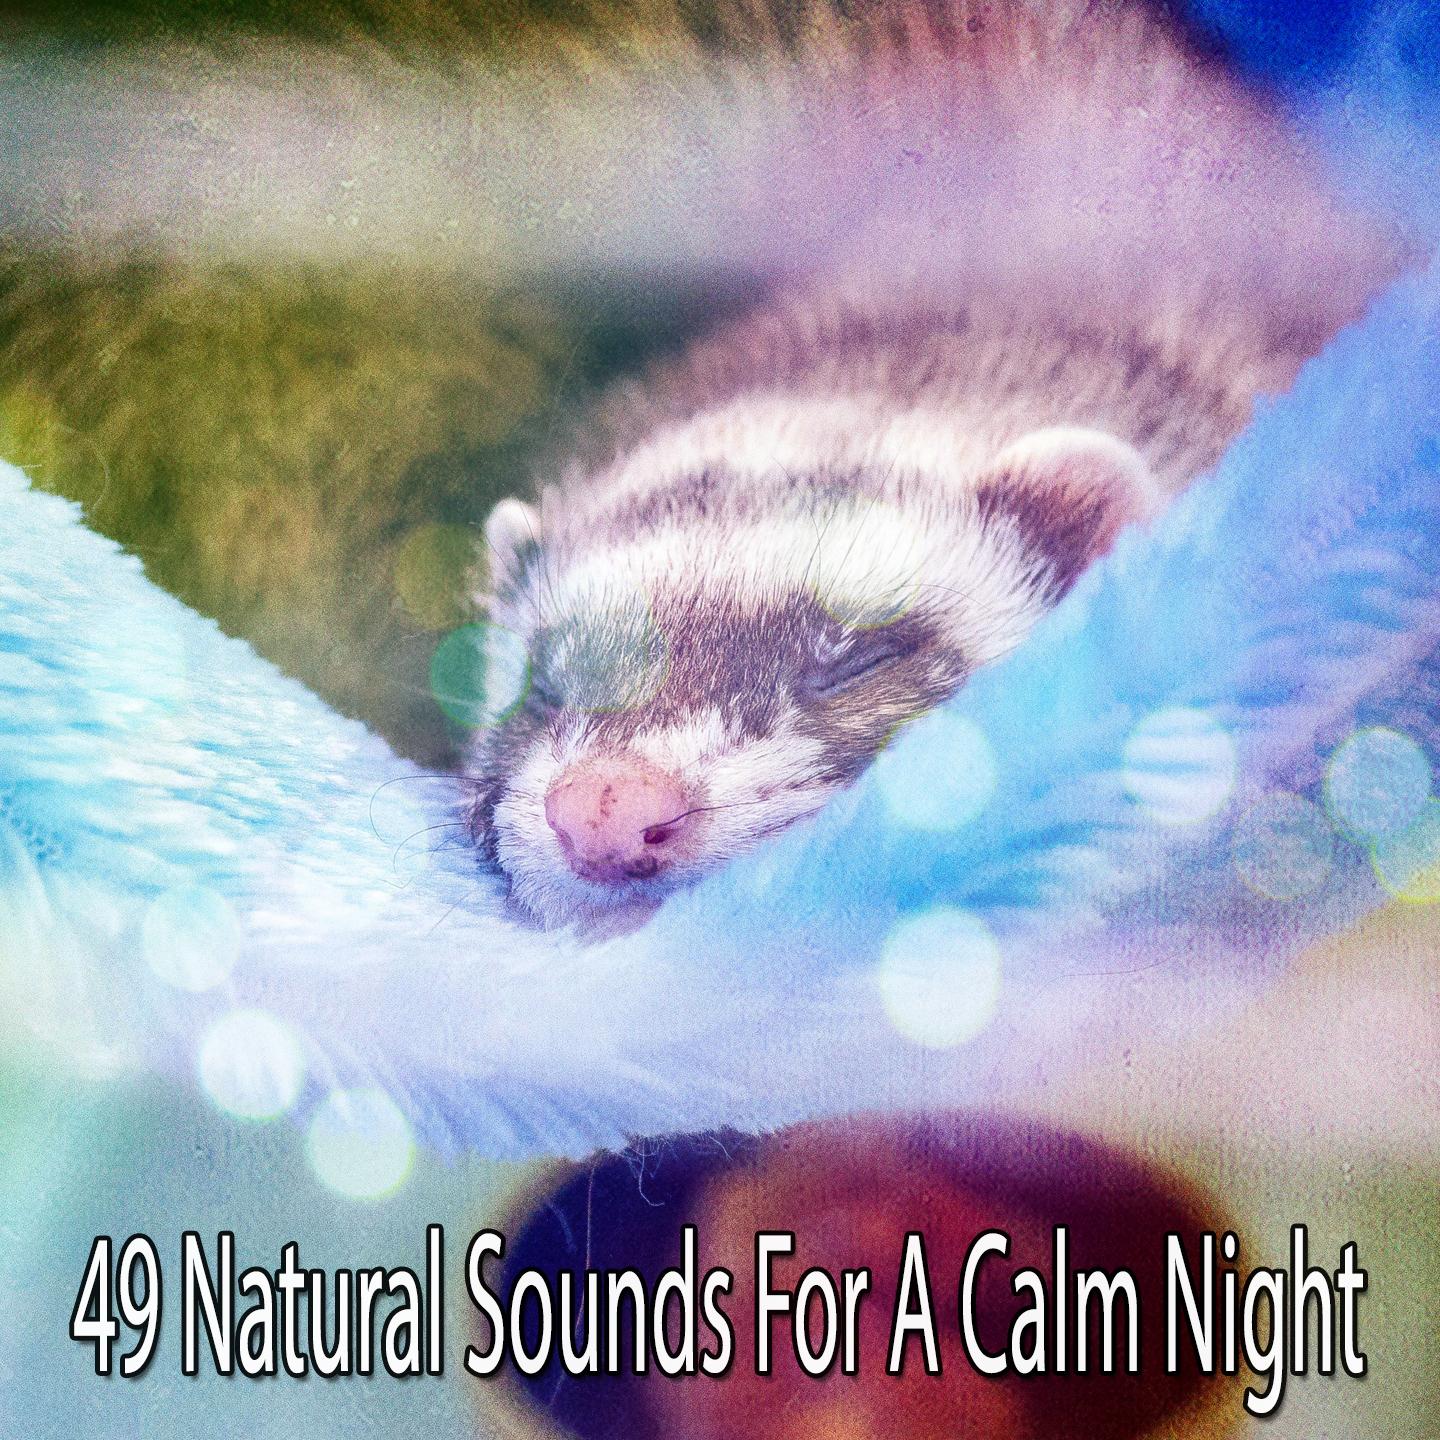 49 Natural Sounds For A Calm Night